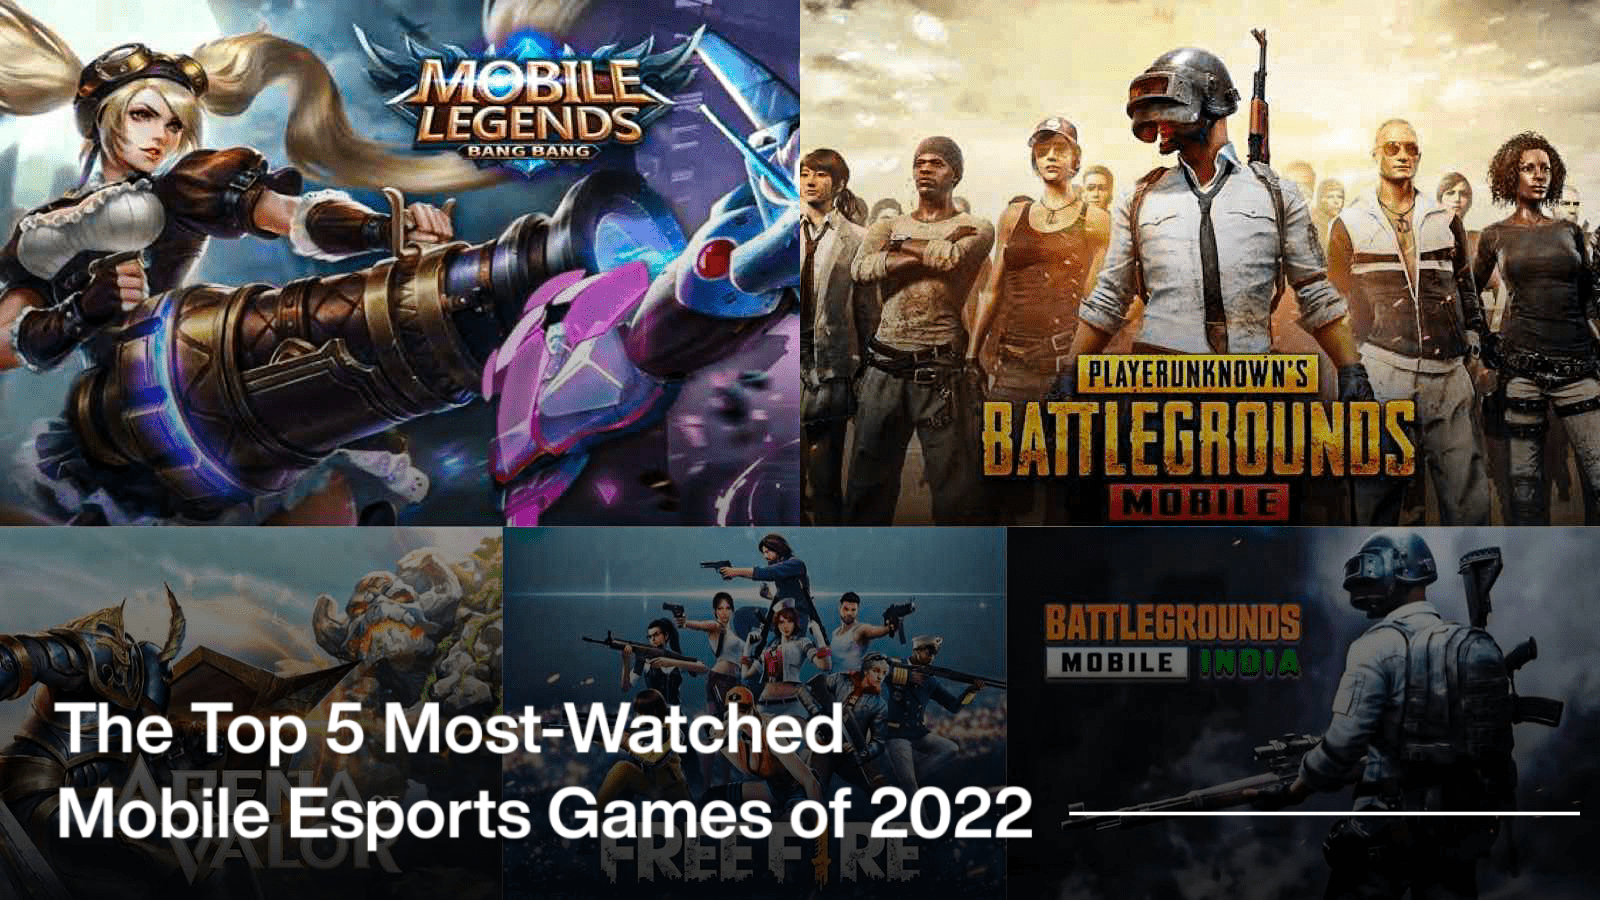 The Top 5 Most-Watched Mobile Esports Games in 2022